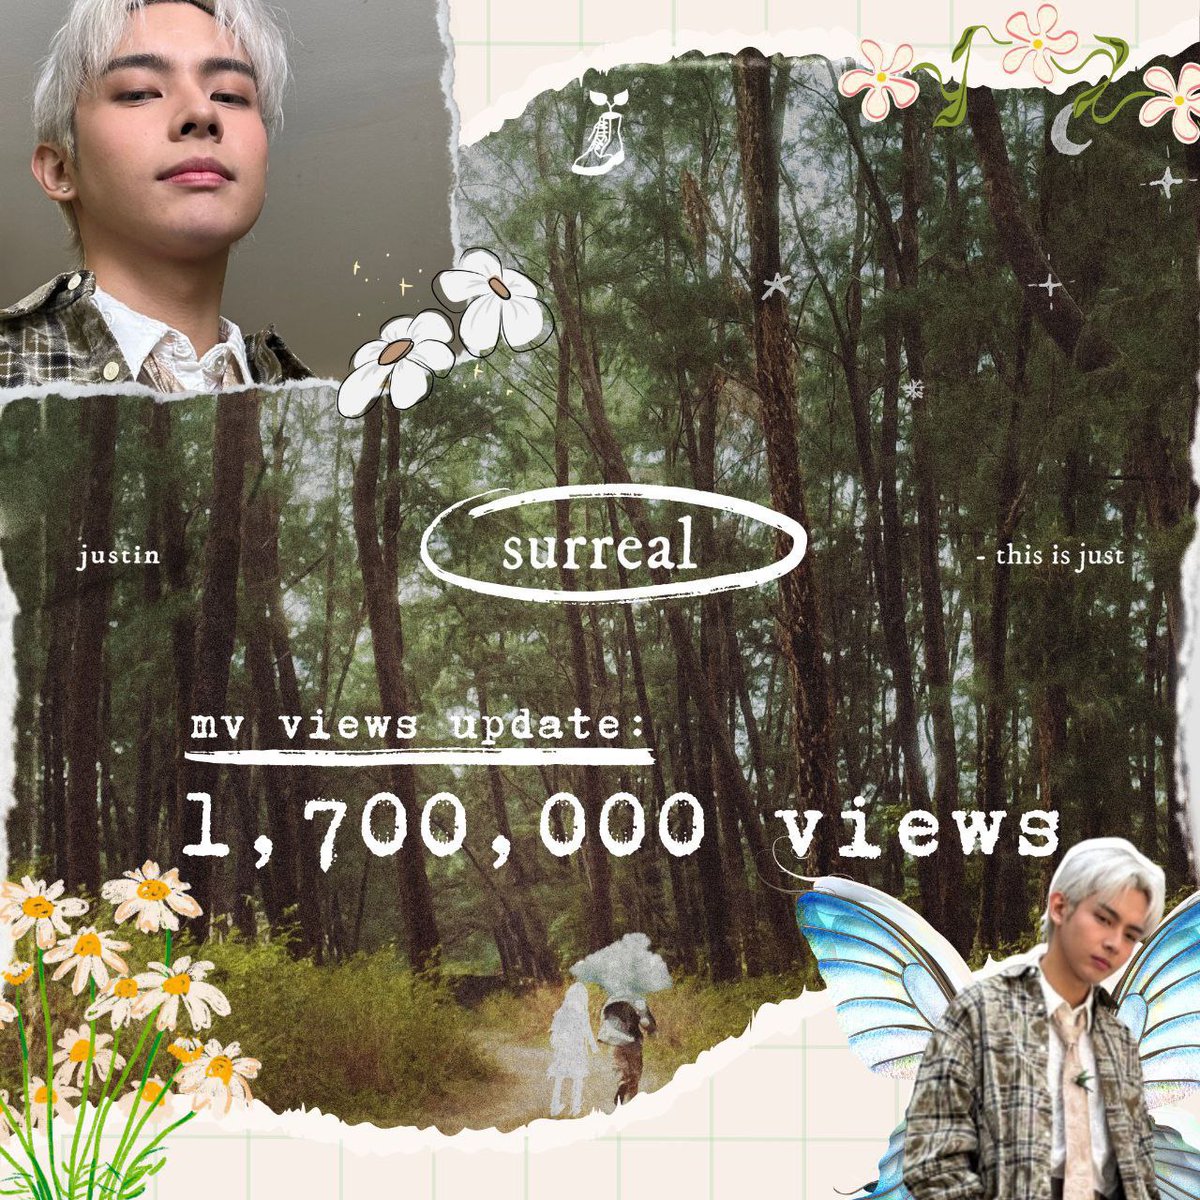 Almost there, fam! a grand thank you for all kinds of support to #justin's #surreal music video in YT! Let's double our efforts and get that two million views as soon as possible for an even more surreal experience :DD

watch here: youtu.be/T0lwgP84ajc?si…